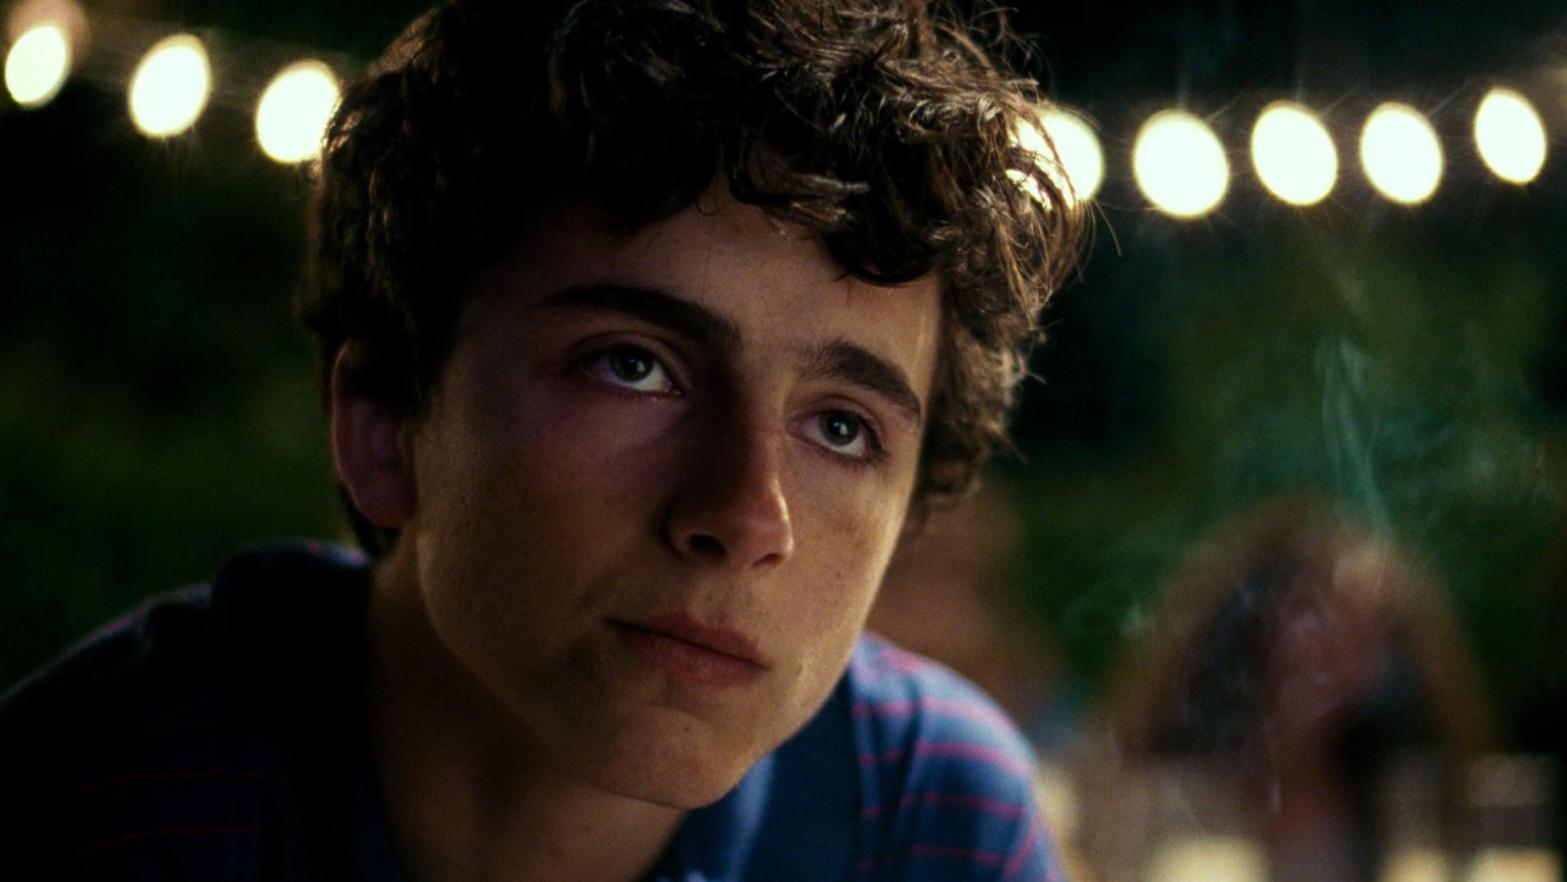 Timothée Chalamet in Call Me By Your Name. (Image: Sony)